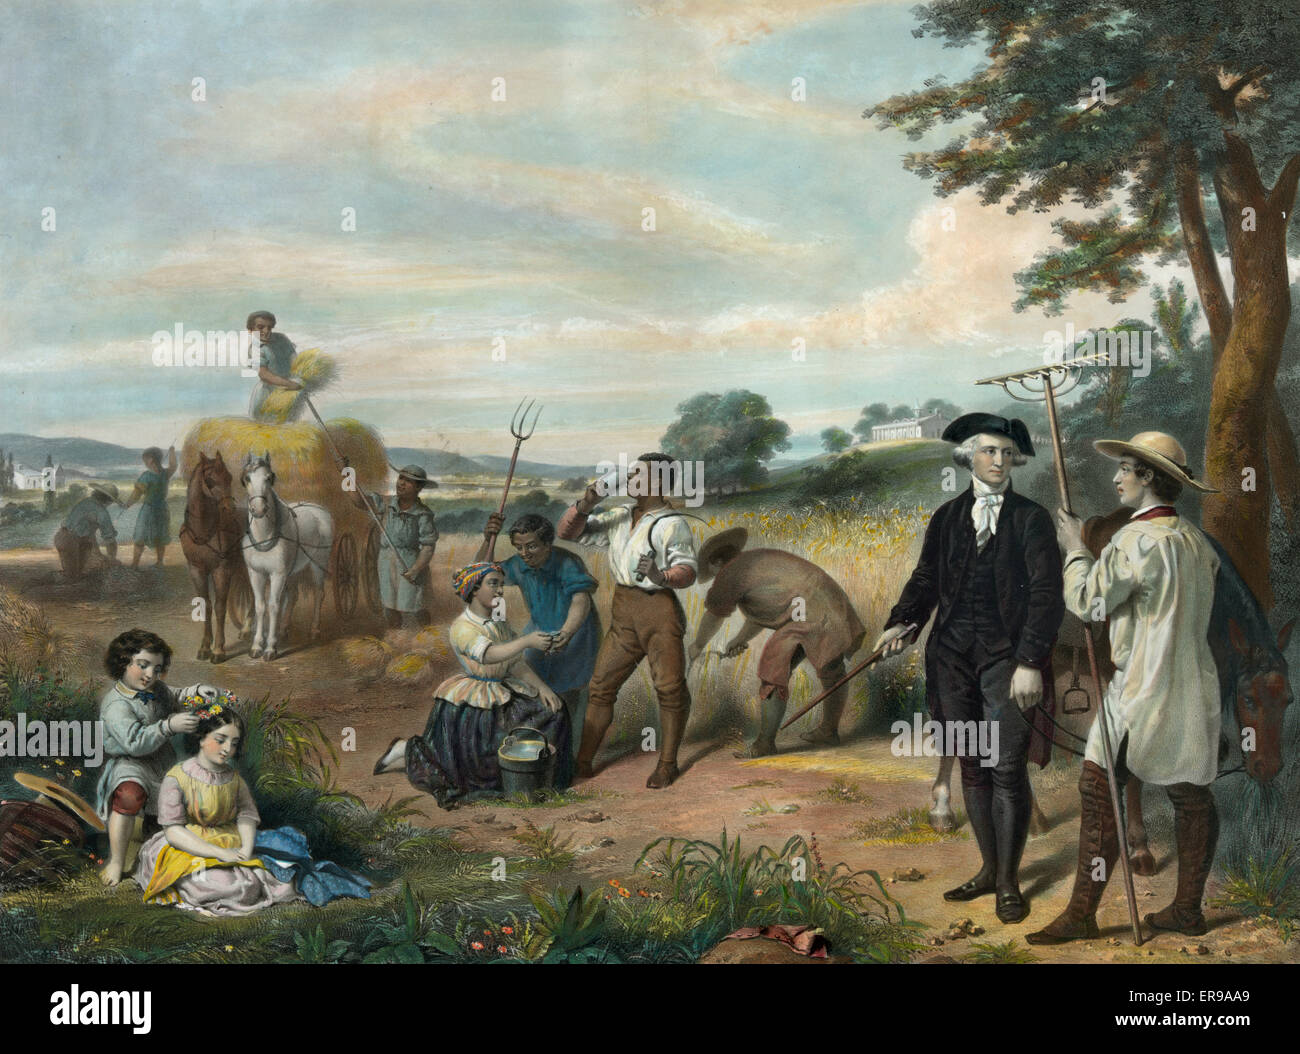 Life of George Washington--The farmer. Washington standing among African-American field workers harvesting grain, Mt. Vernon in background. Stock Photo